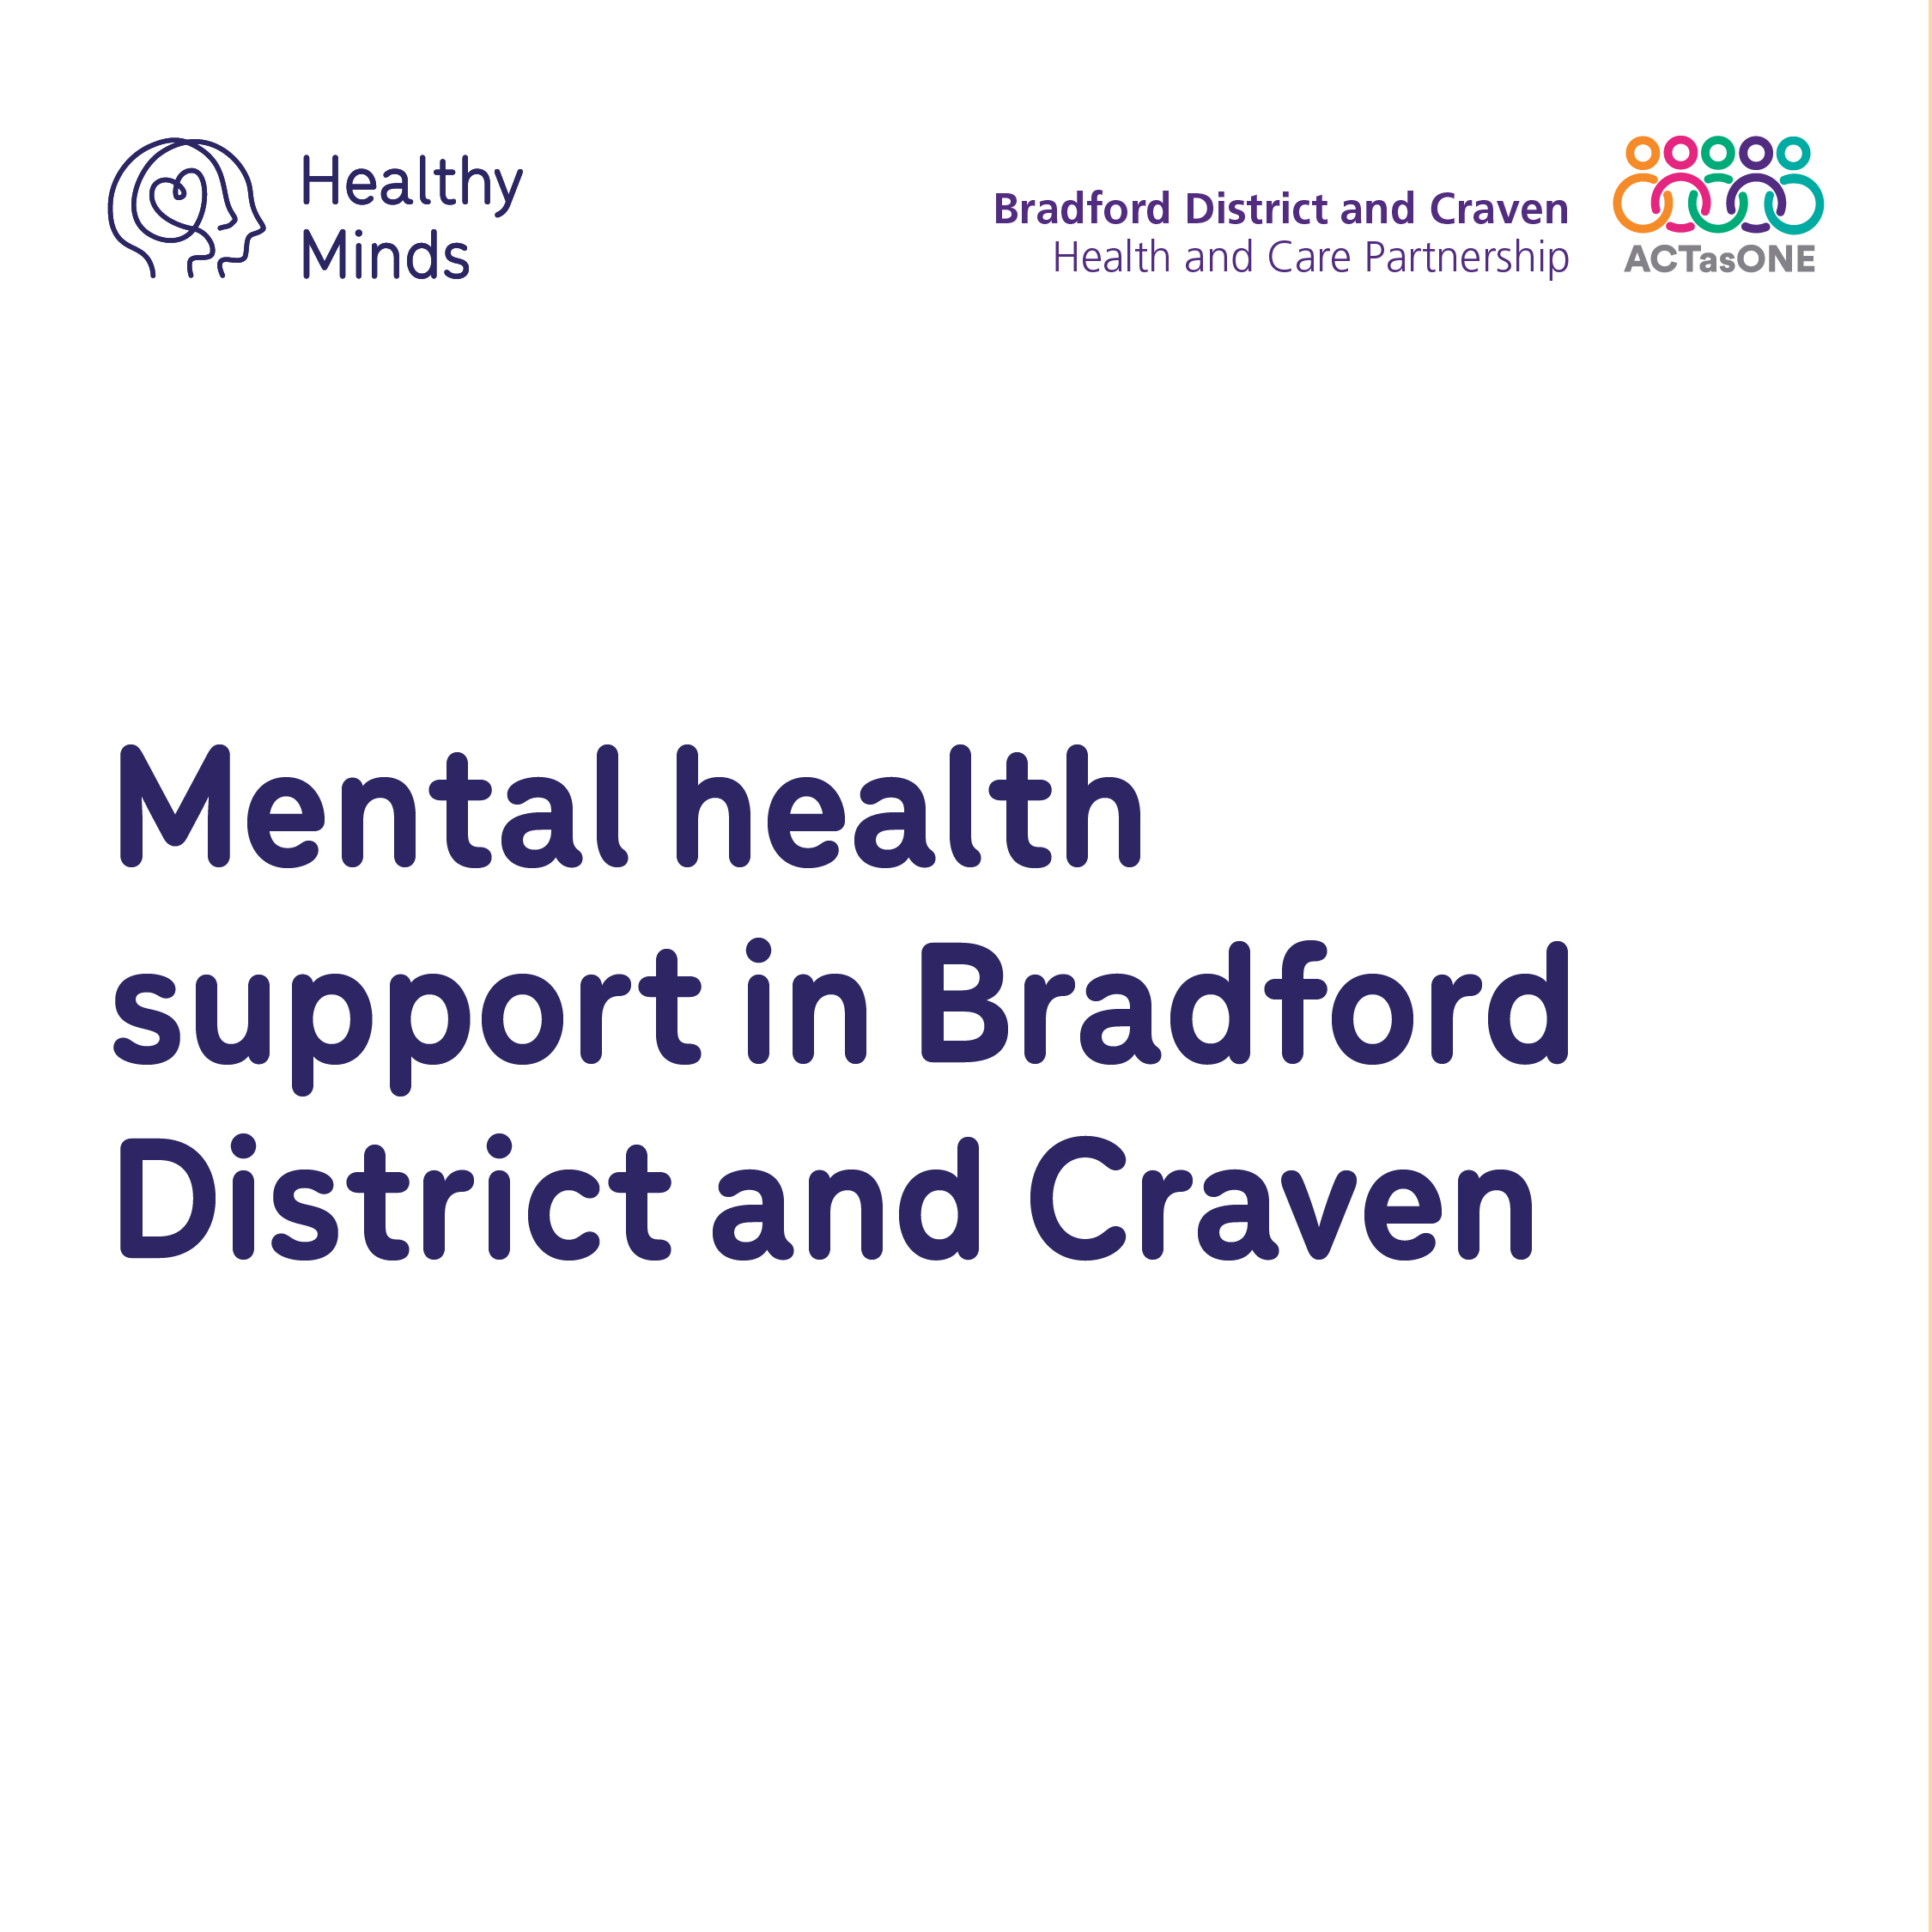 Mental health support in Bradford District and Craven